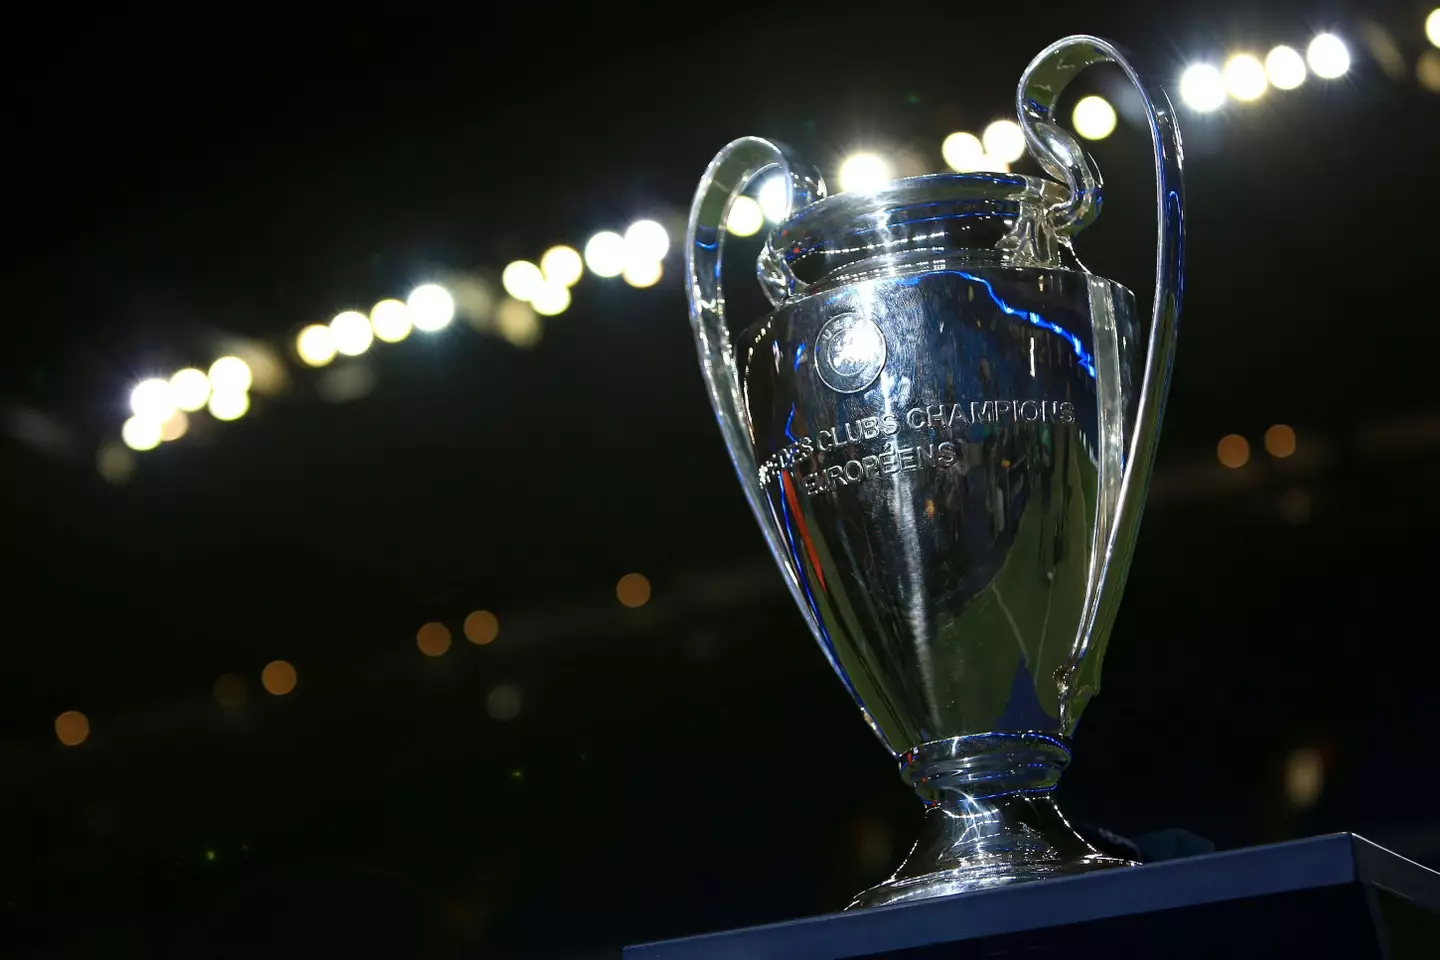 The Champions League final will now take place somewhere else.